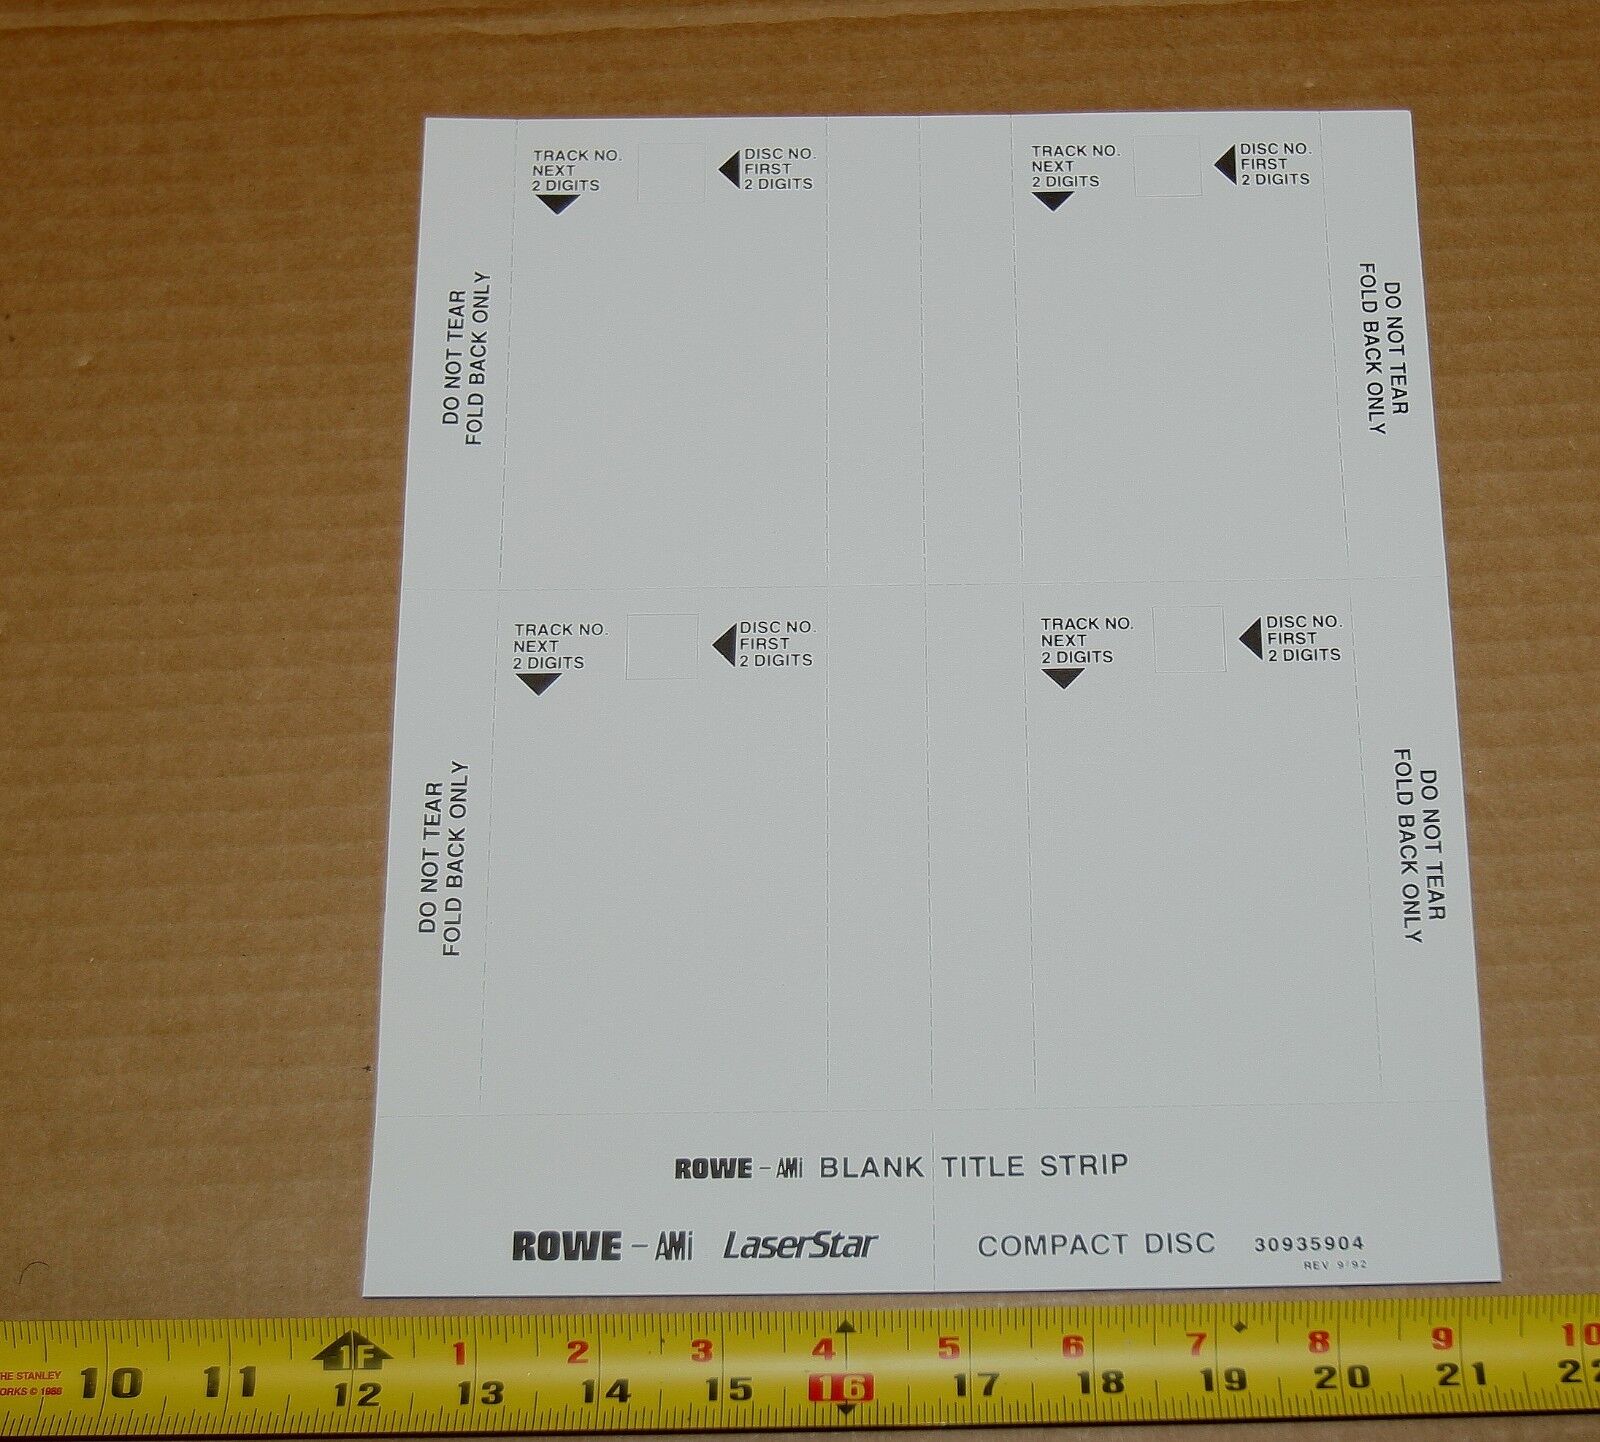 Rowe AMI CD-100 jukebox blank title strip cards - full sheets, 25 x 4 = 100